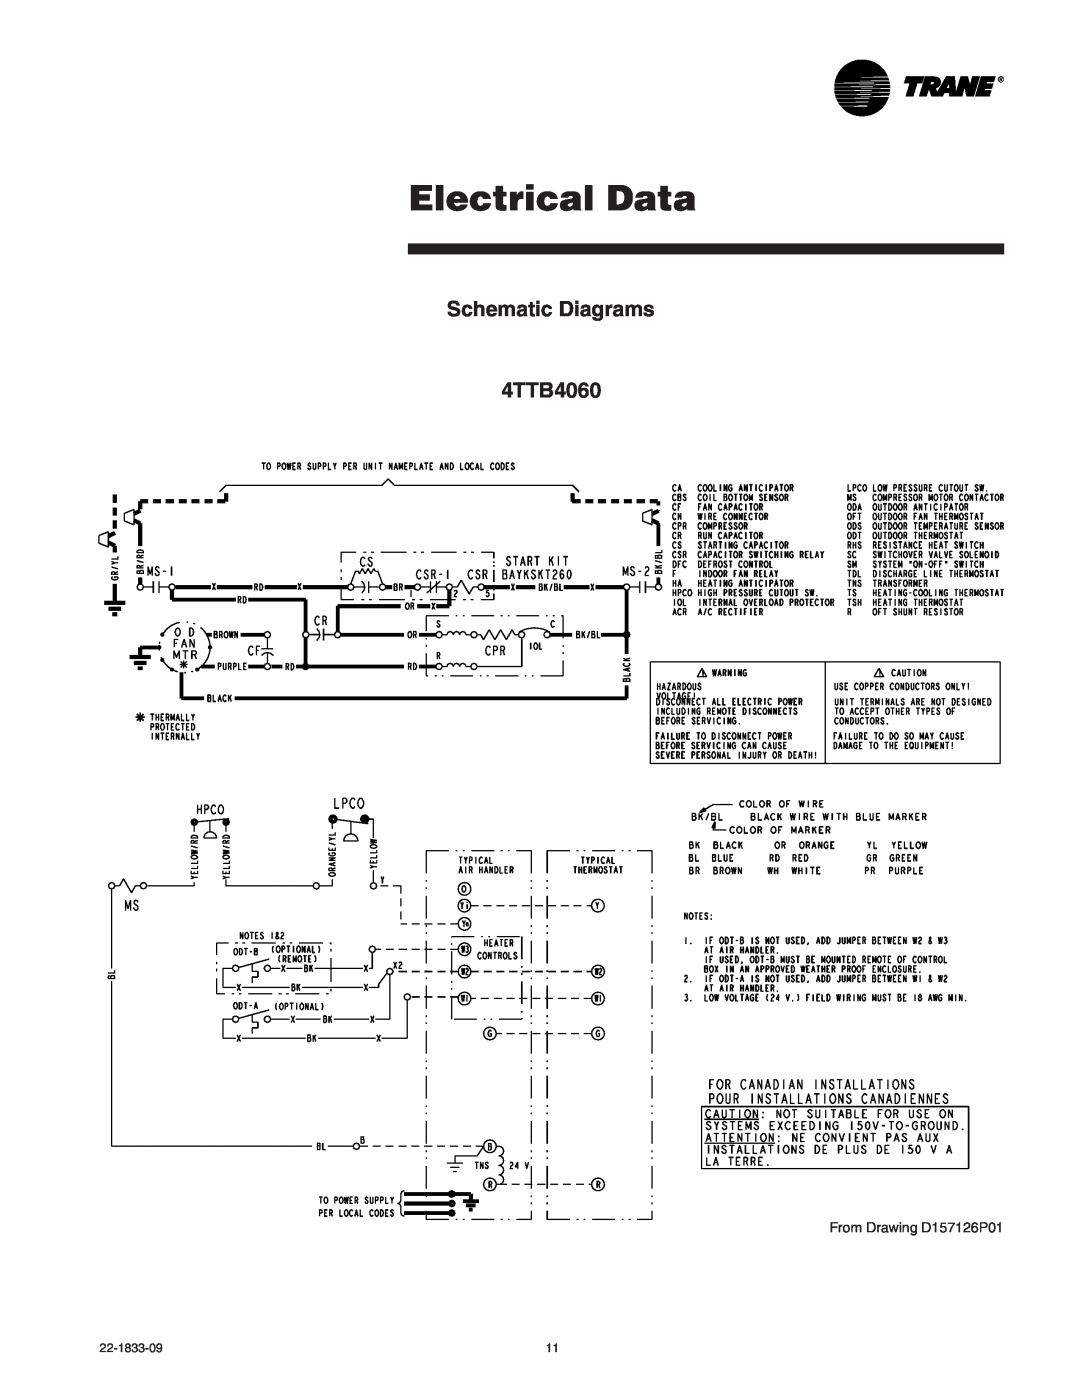 Trane manual Electrical Data, Schematic Diagrams 4TTB4060, From Drawing D157126P01 